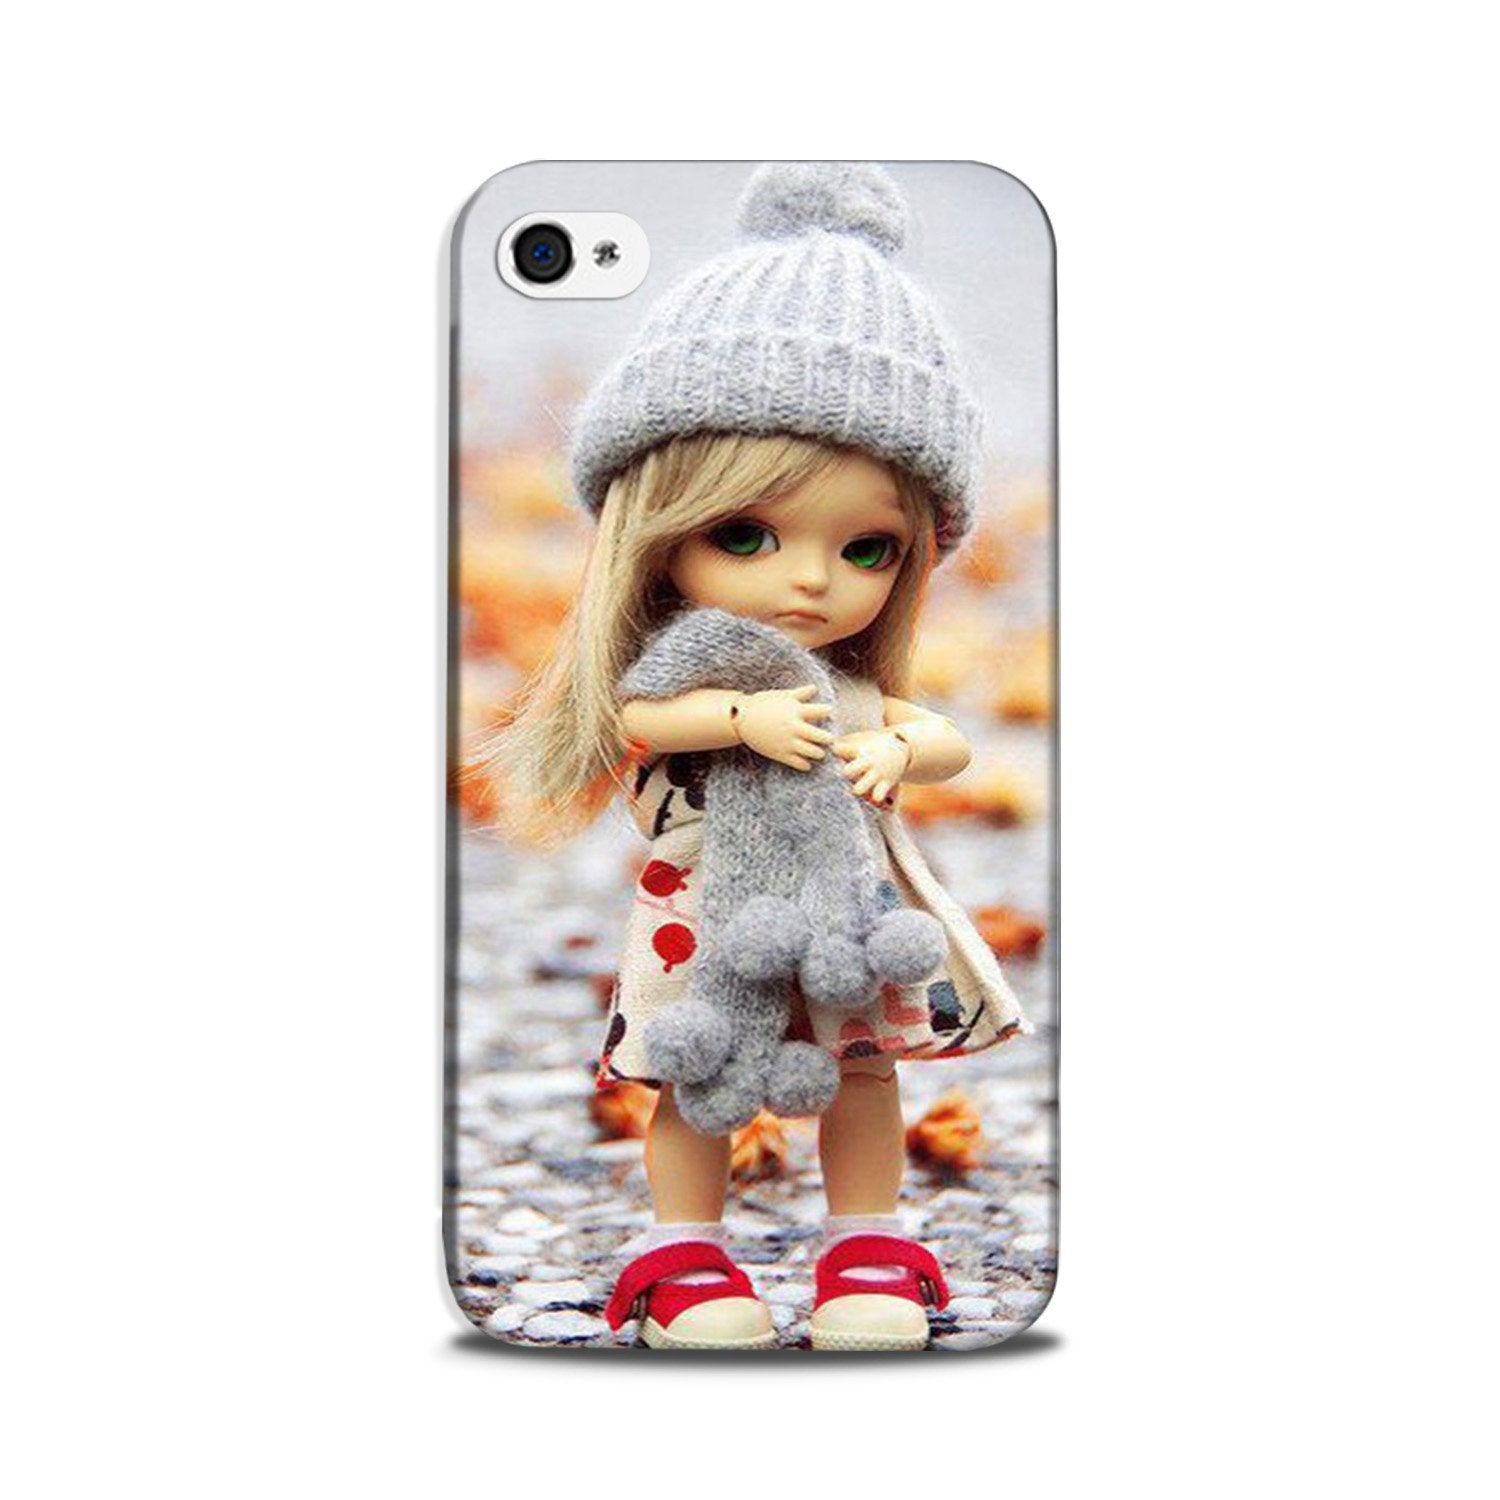 Cute Doll Case for iPhone 5/ 5s